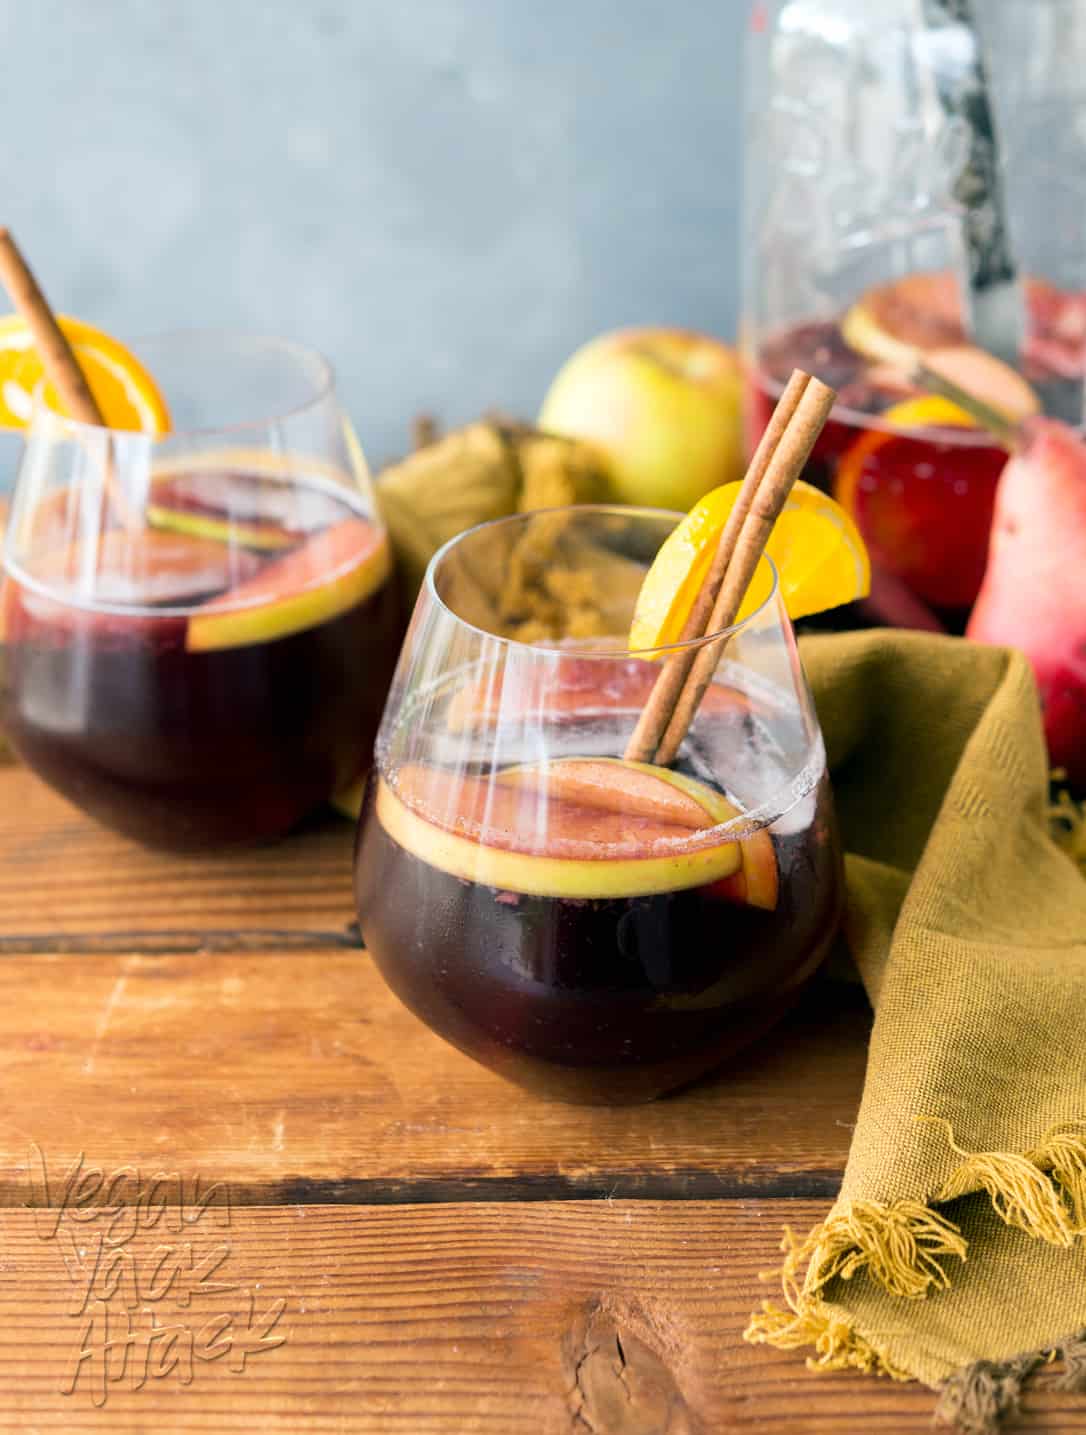 Easy-to-make Sparkling Fall Sangria with crisp apples, pears, and spices! #vegan #glutenfree @Veganyackattack